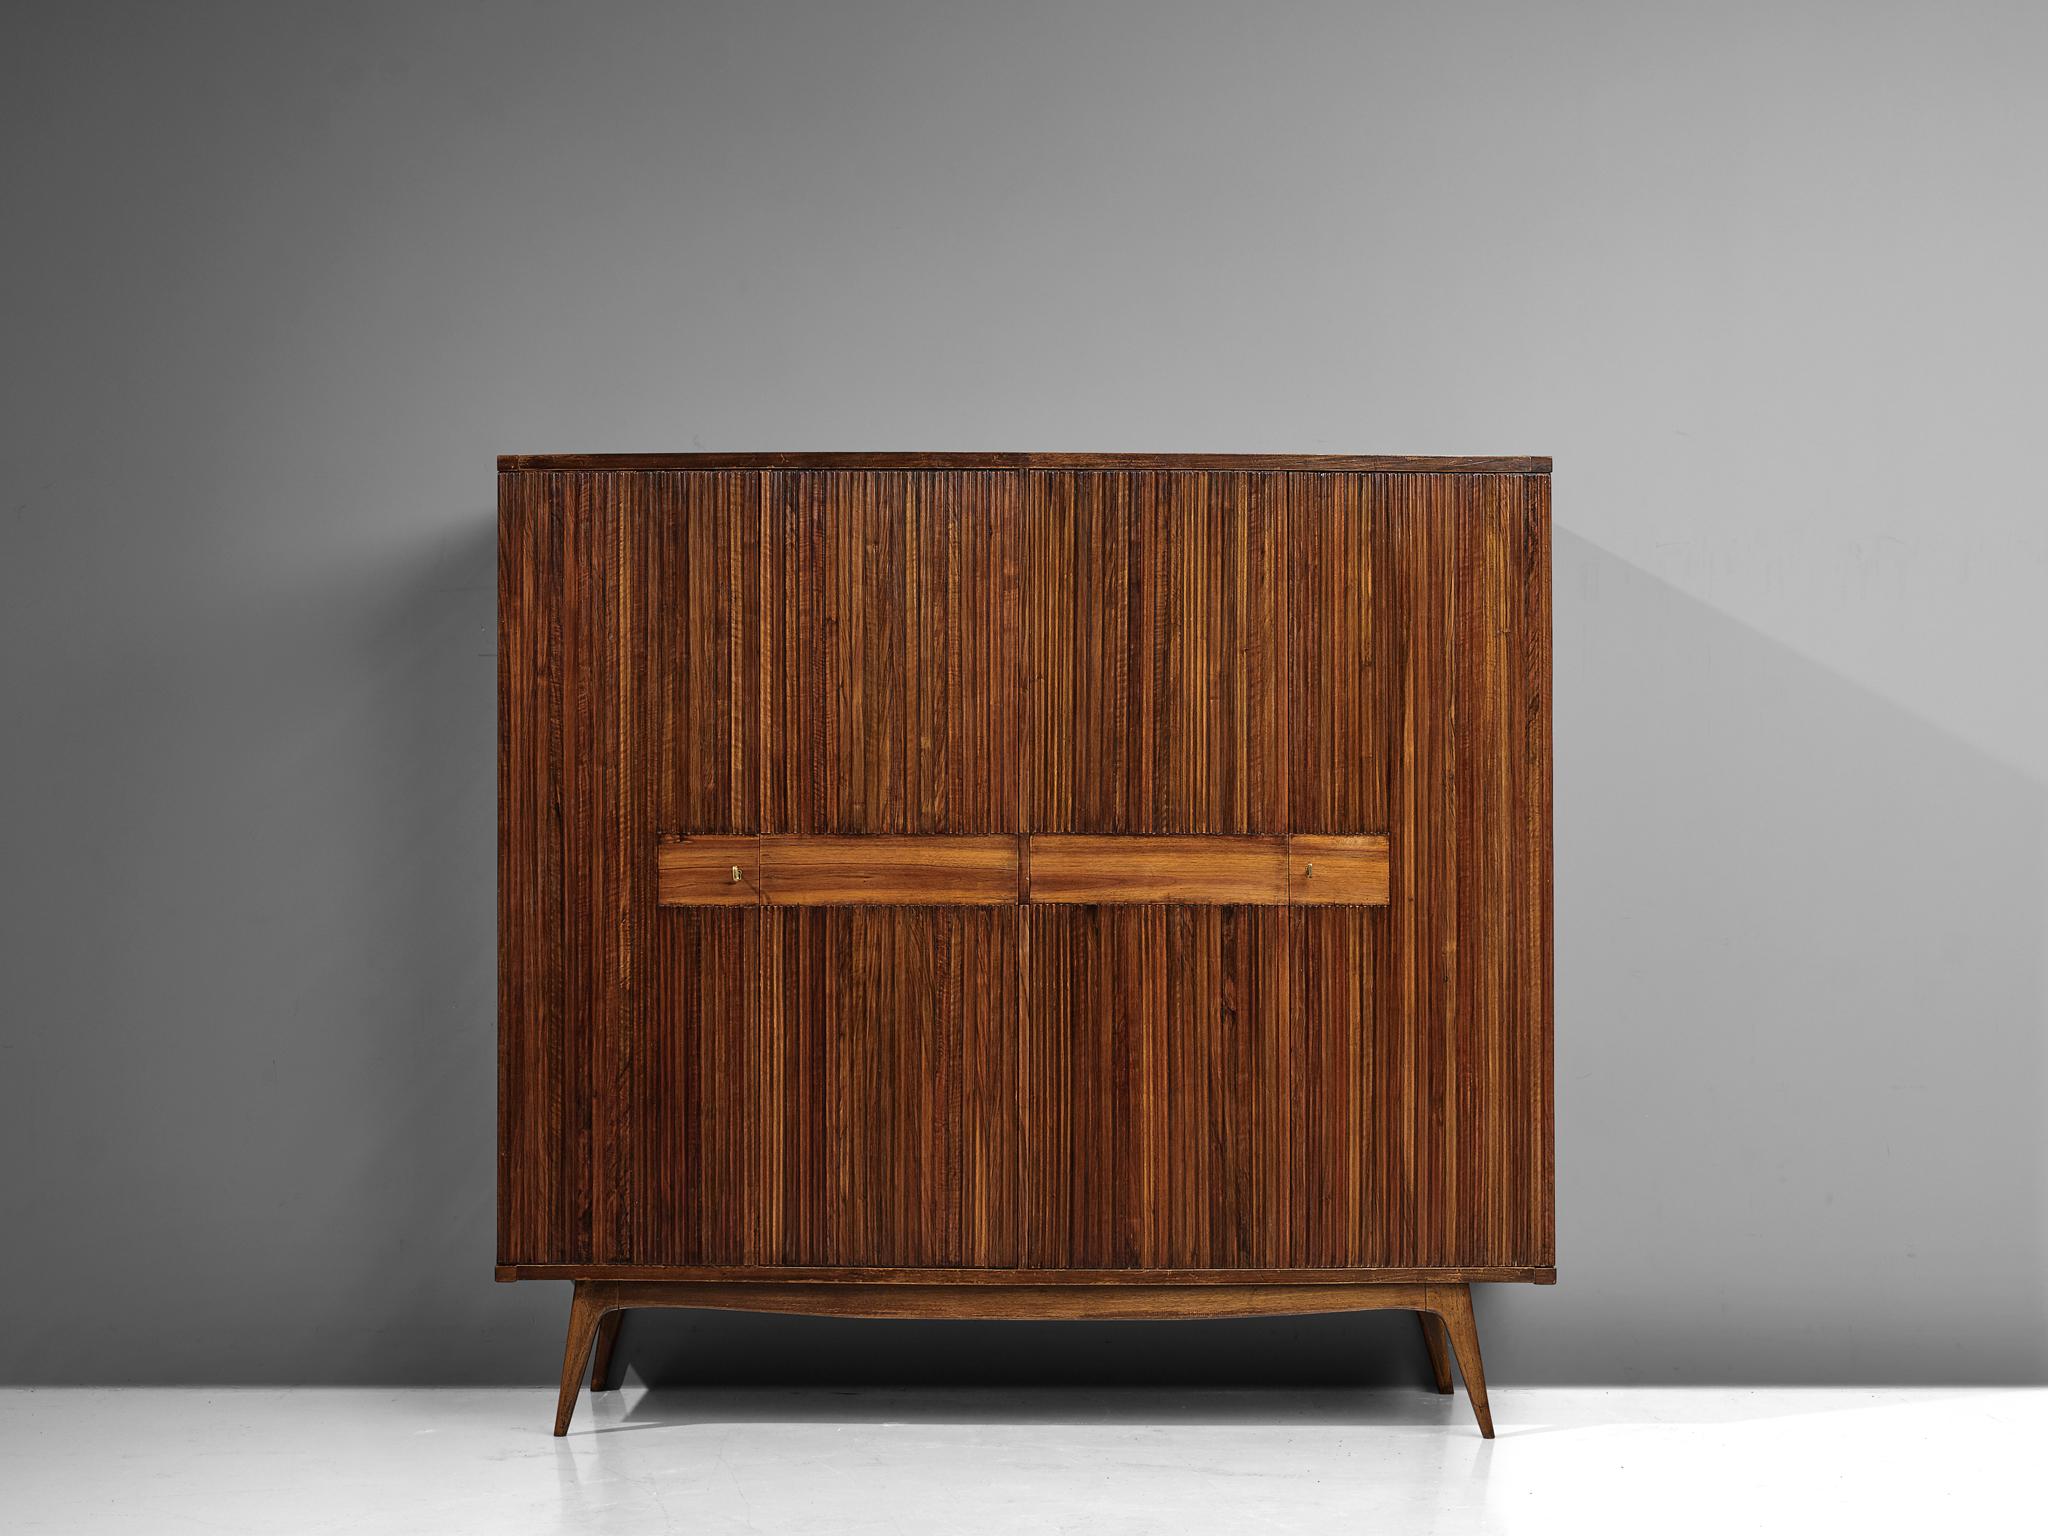 Large wardrobe, walnut, brass, Italy, 1960s

This truly elegant Italian wardrobe has a striking design. Not only the relief surface of the front doors but also the solution of the base is a convincing combination. The tapered and slanted legs lift